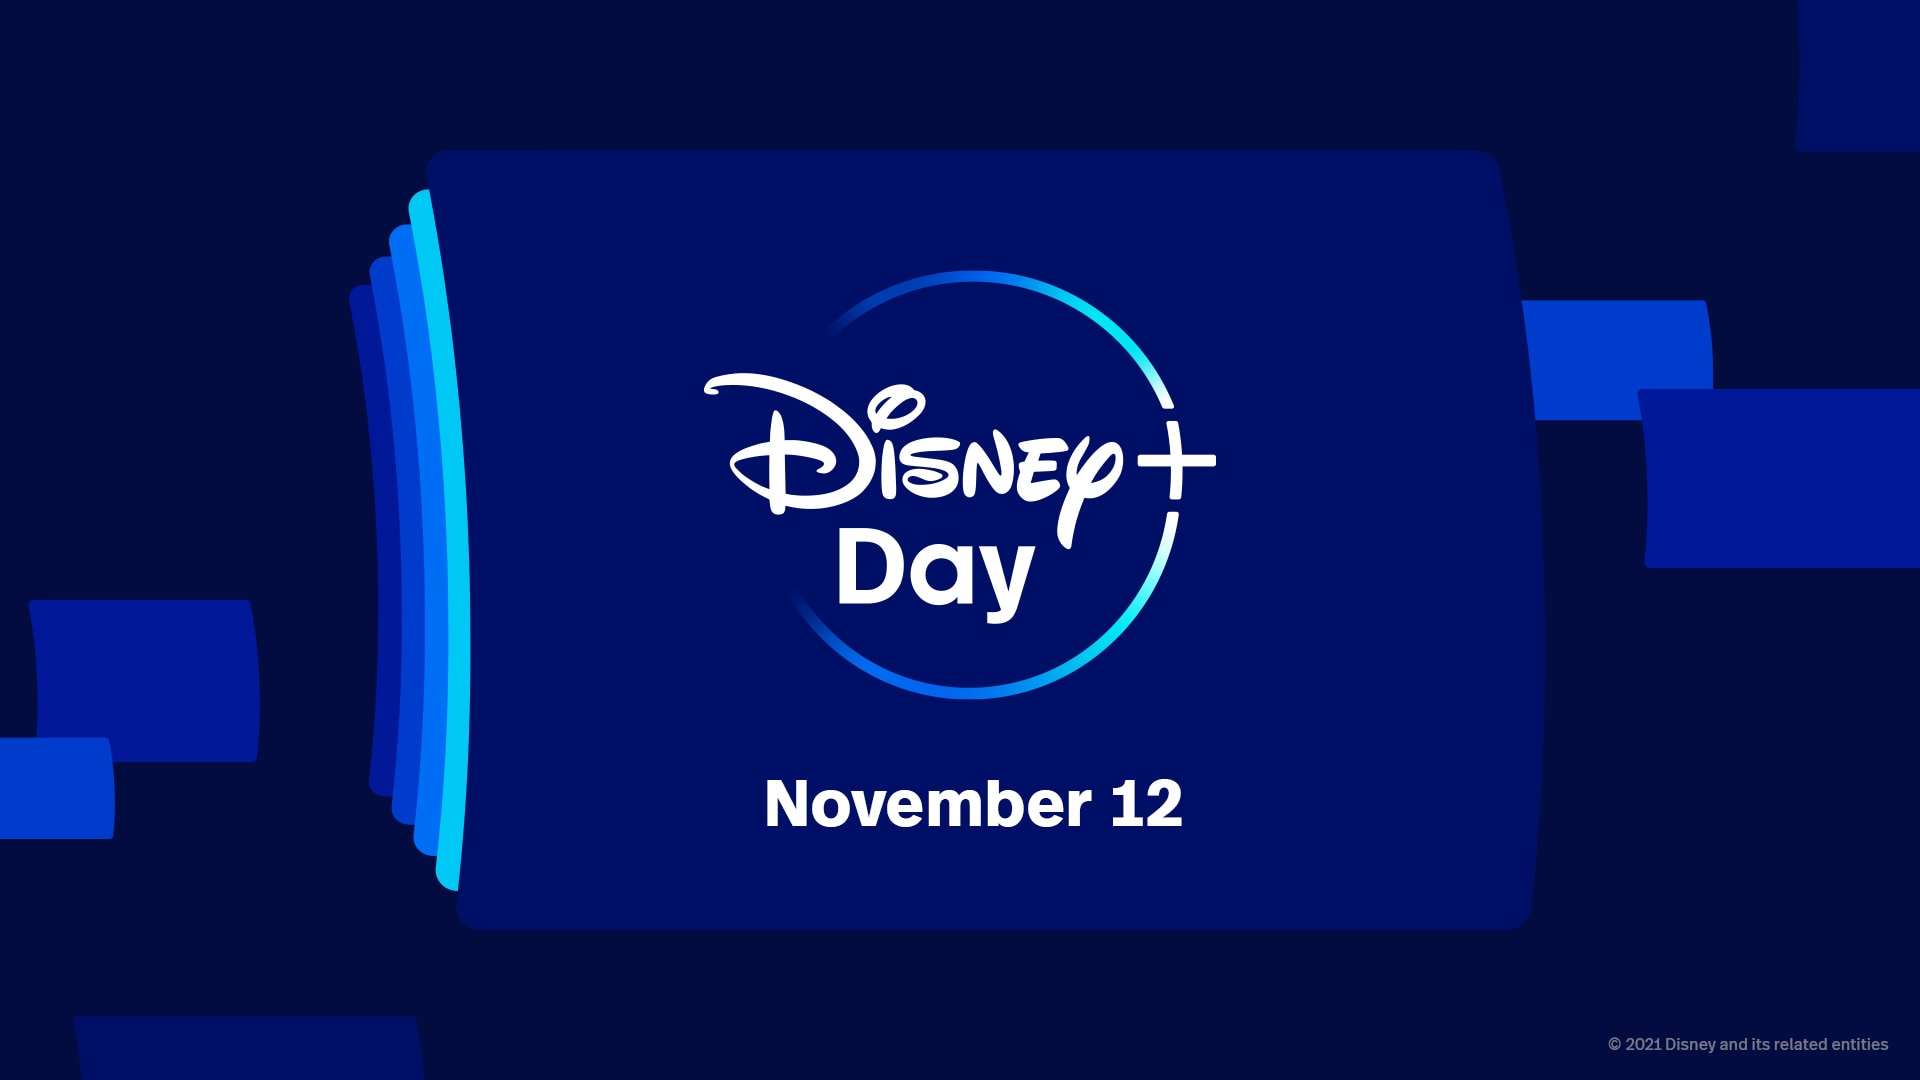 Celebration of Disney+ Day Begins With Week of Promotions From The Walt Disney Company